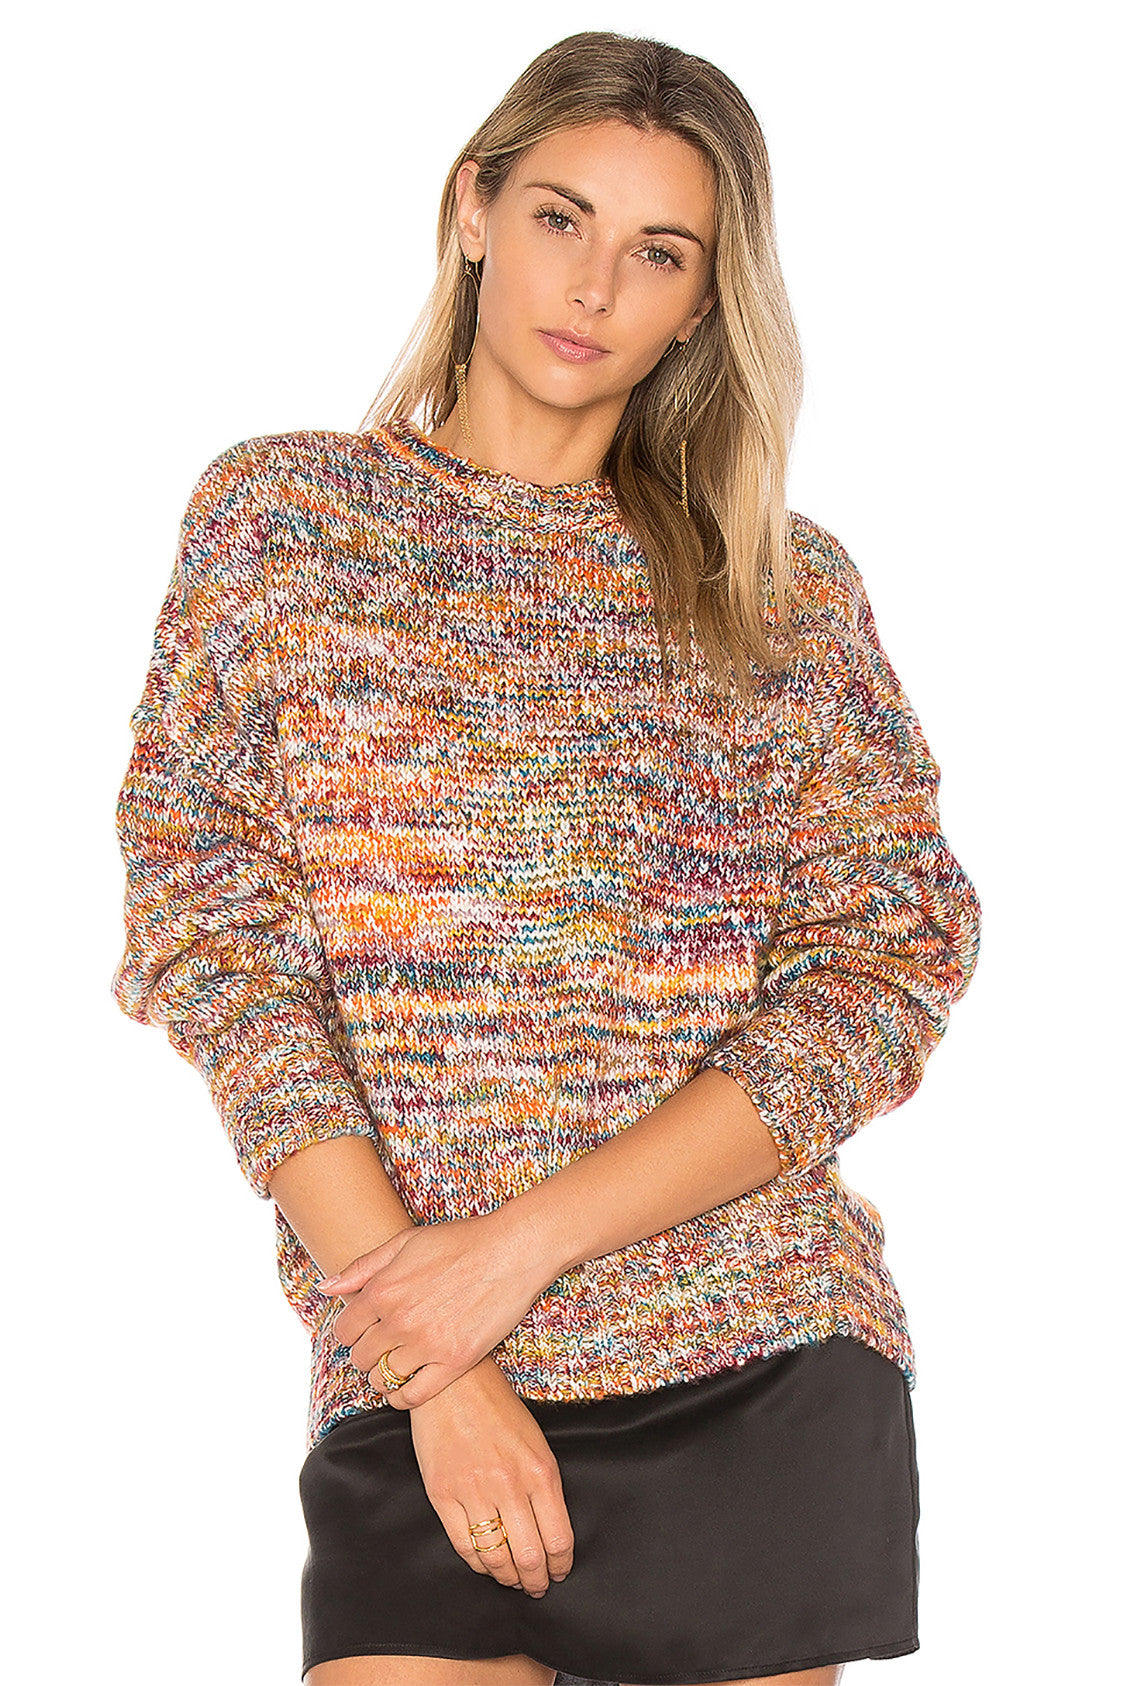 Willoughby Pullover in RAINBOW MULTI